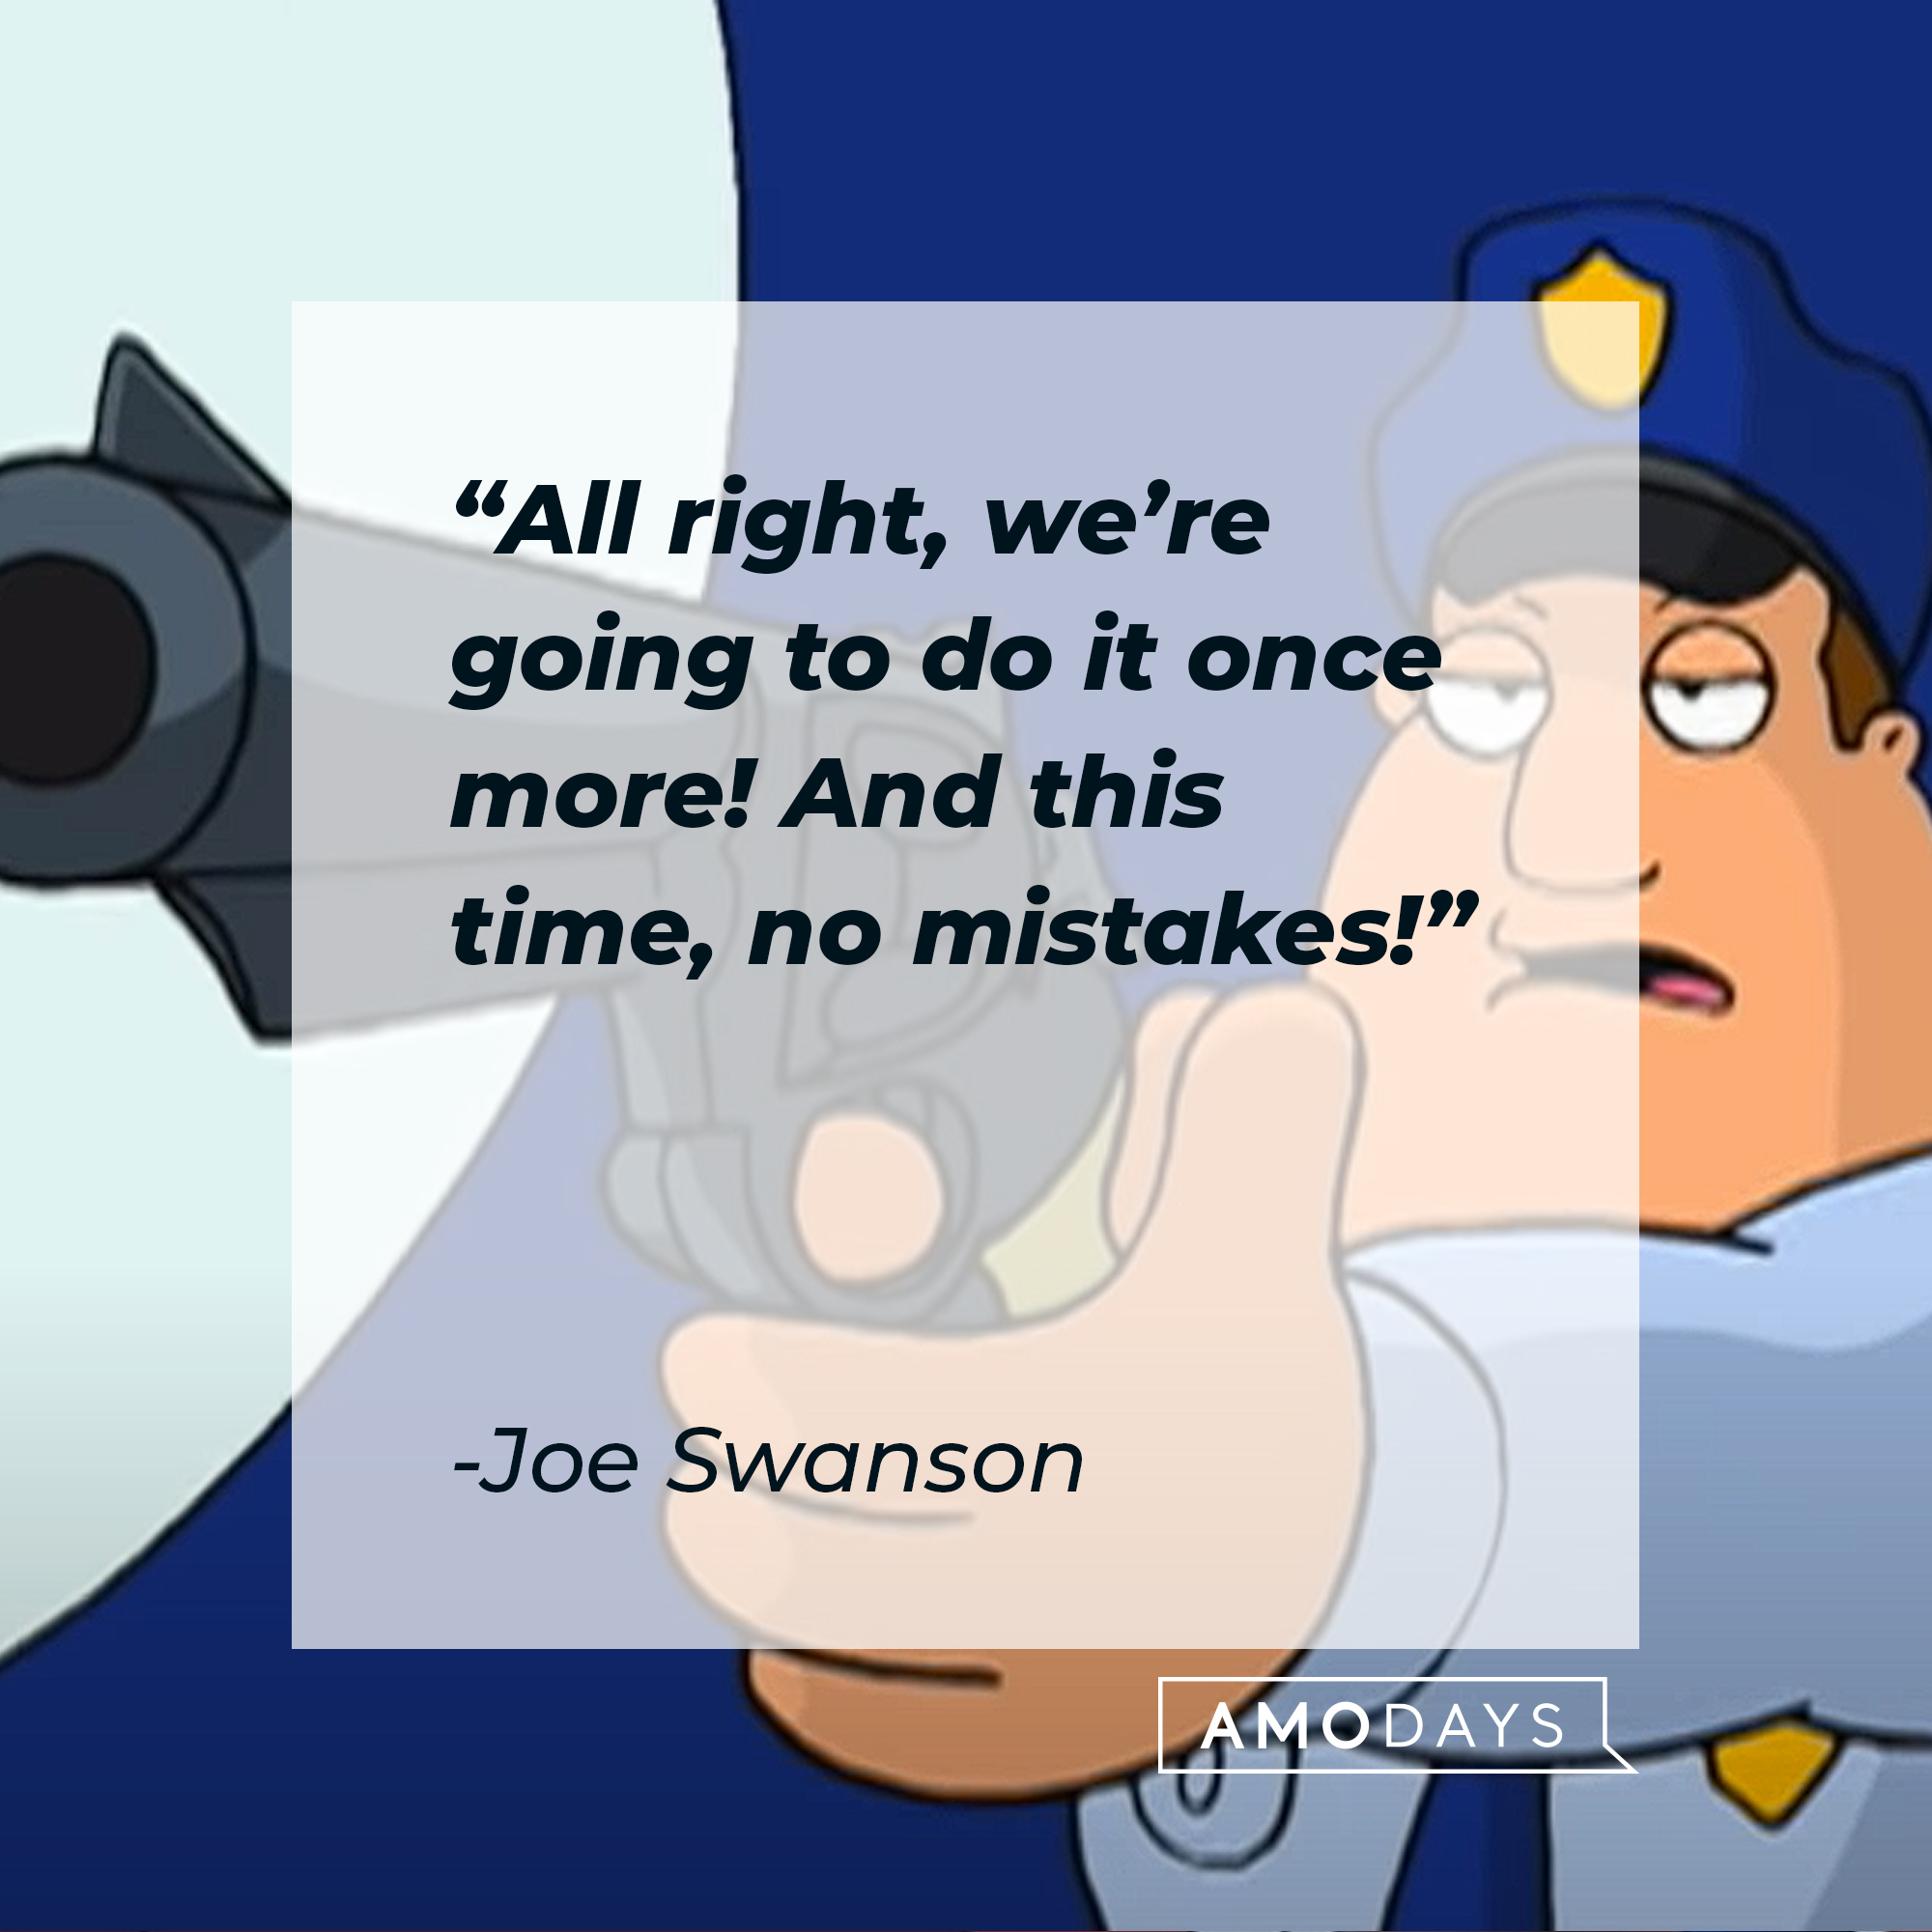 Joe Swanson from "Family Guy" with his quote: “All right, we’re going to do it once more! And this time, no mistakes!” | Source: YouTube.com/TBS